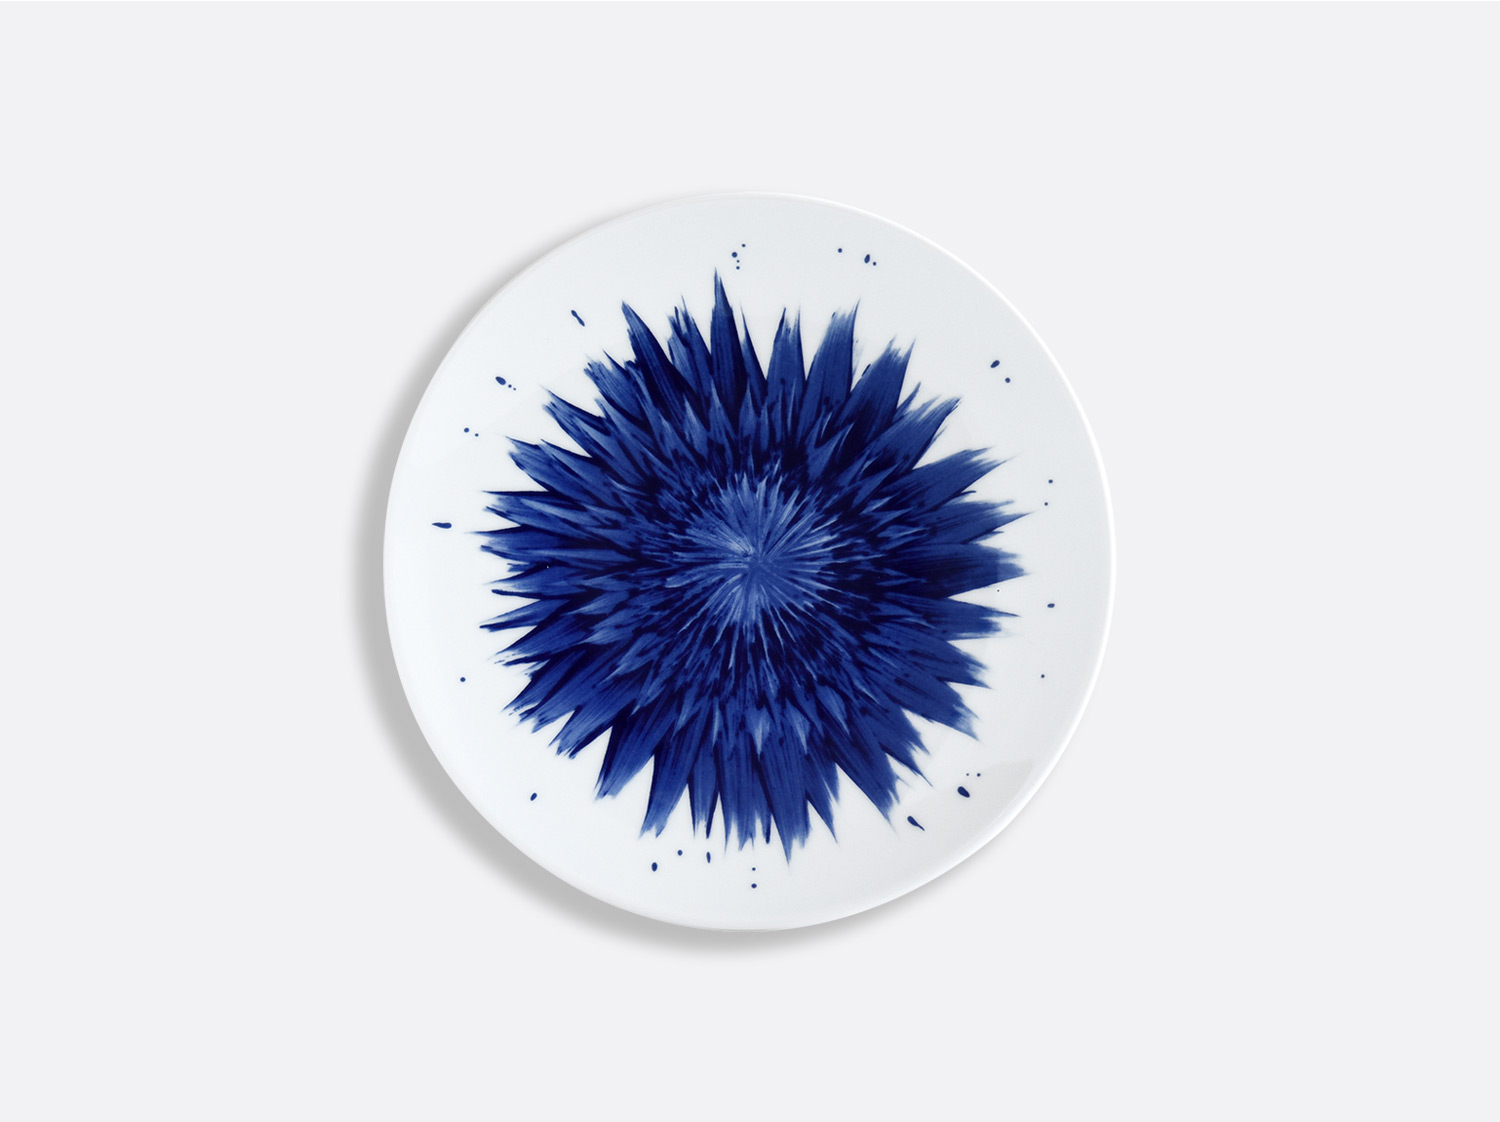 China Coupe bread and butter plate 6.5'' of the collection IN BLOOM - Zemer Peled | Bernardaud